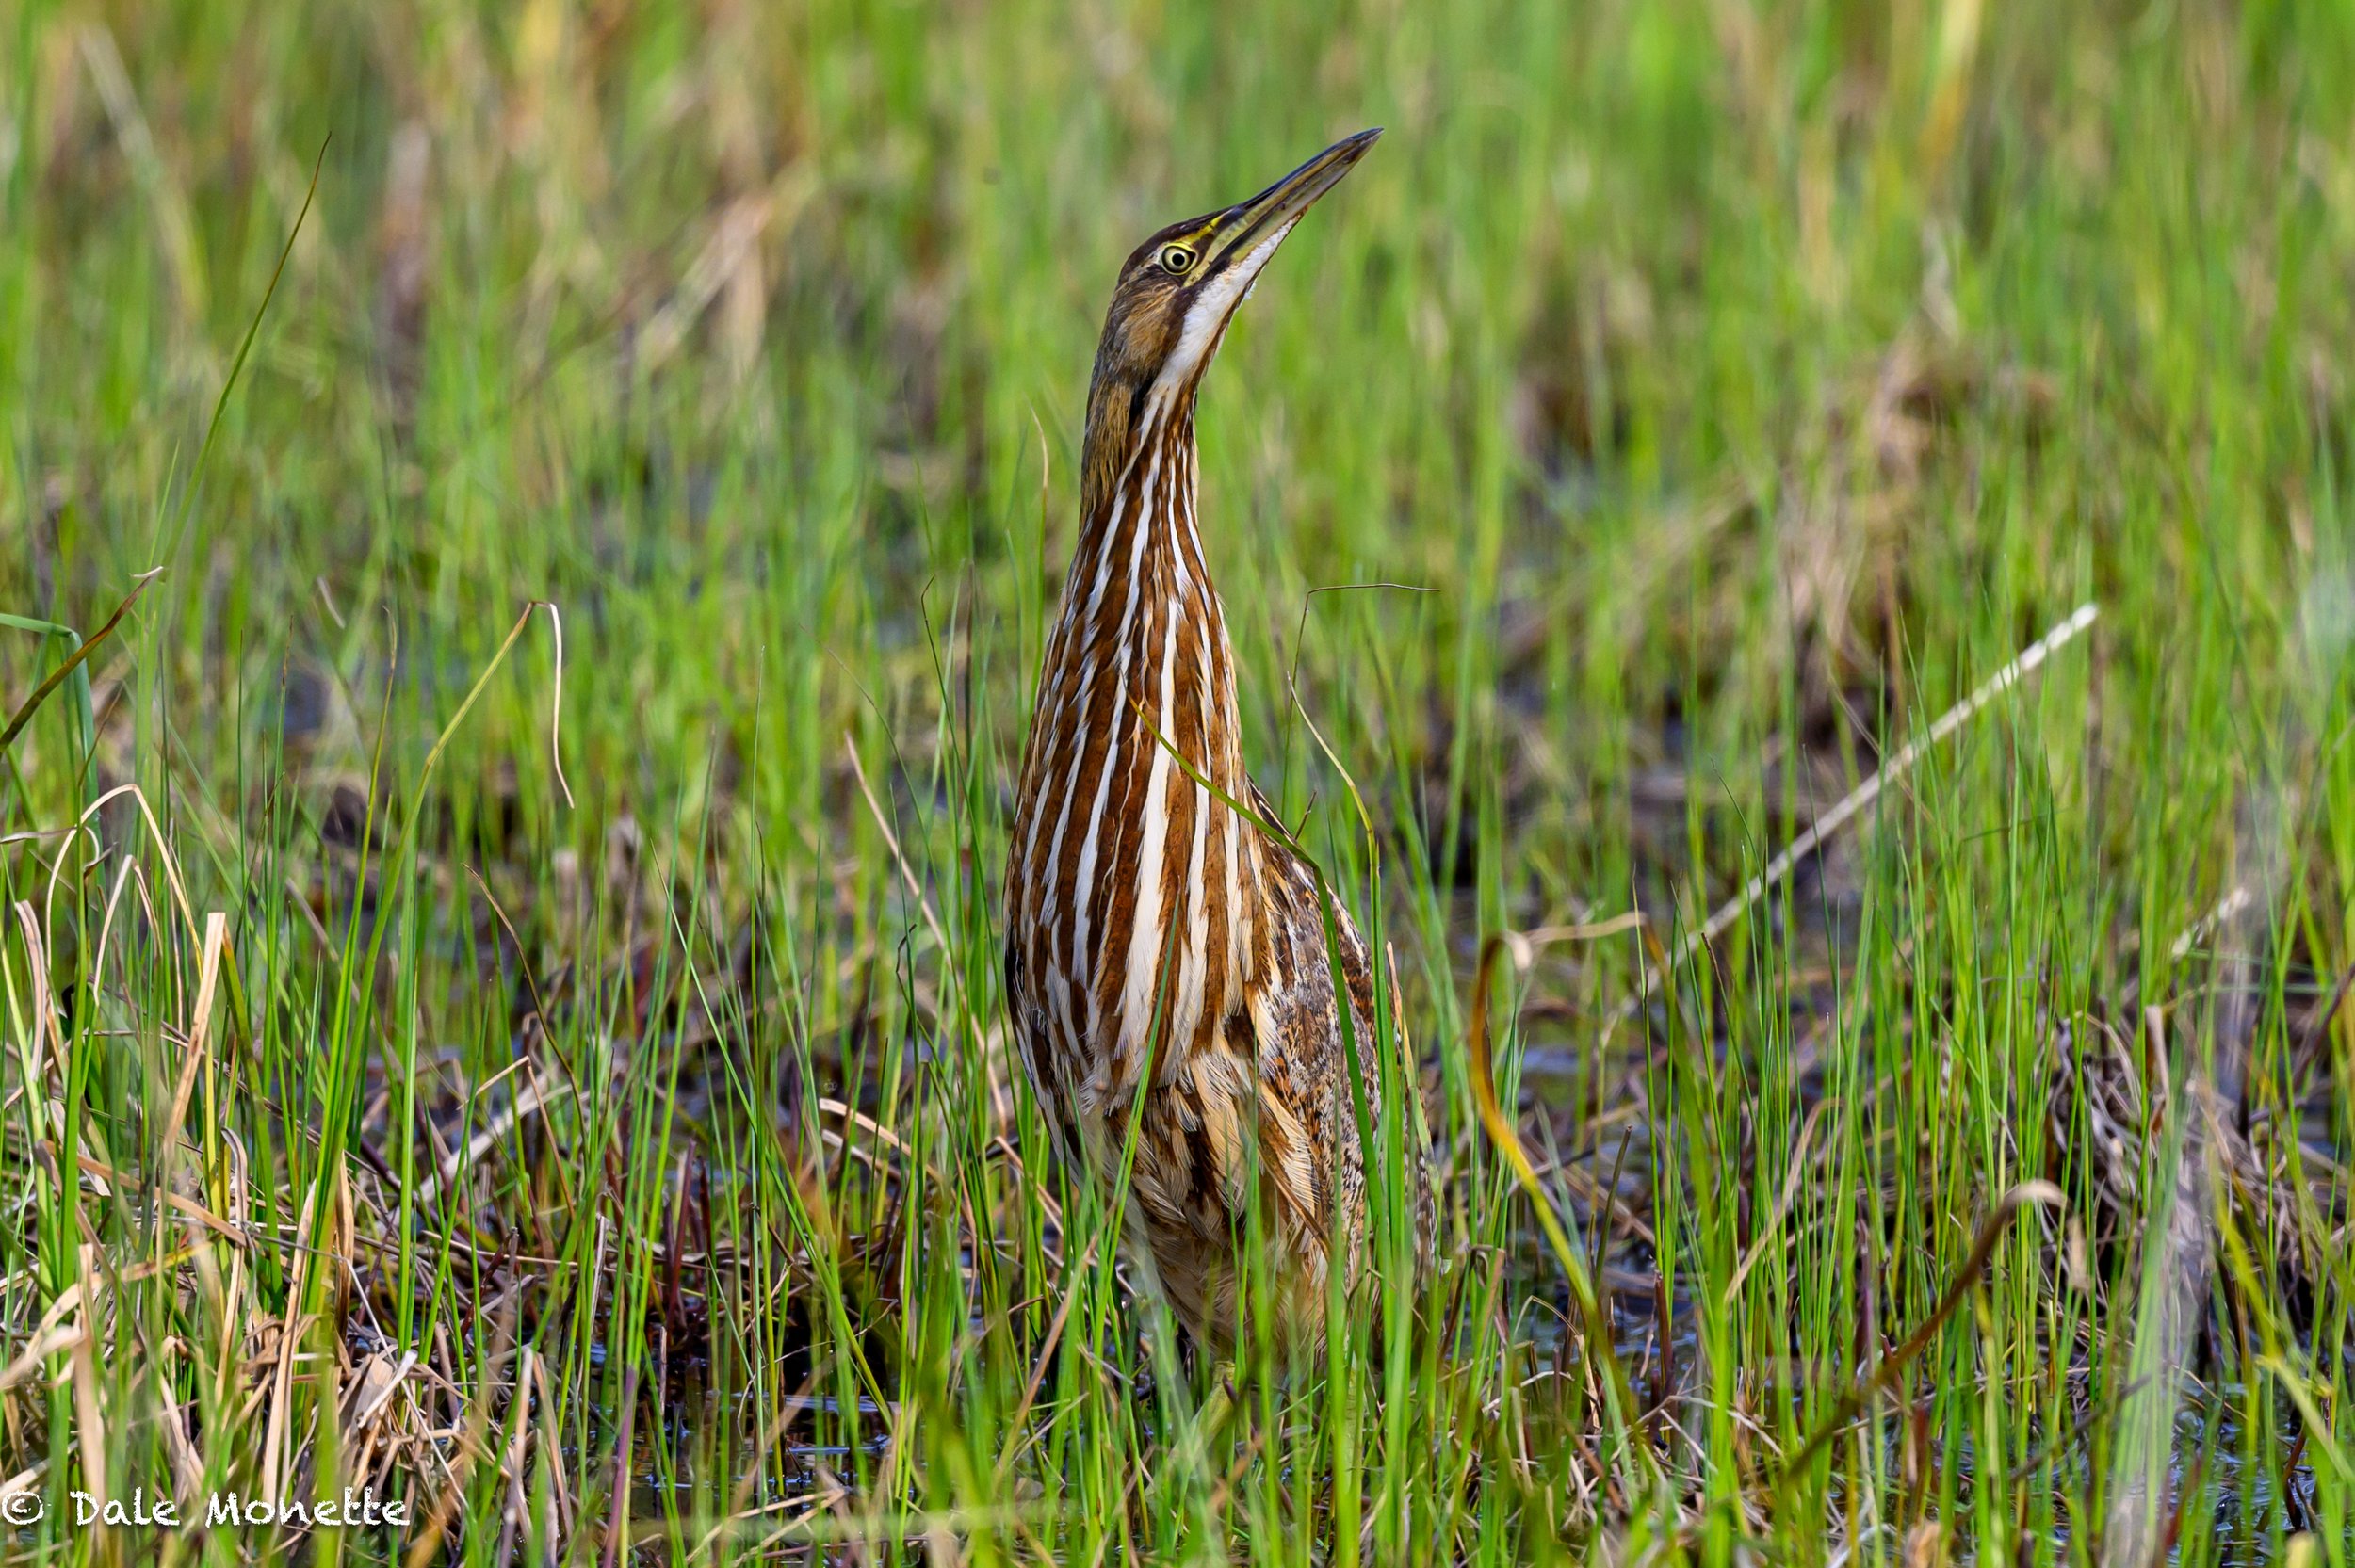   While coming home from southern New Hampshire yesterday I spotted this bittern just sitting in the open grass alongside a large swamp on RT 137 in Jaffrey.  